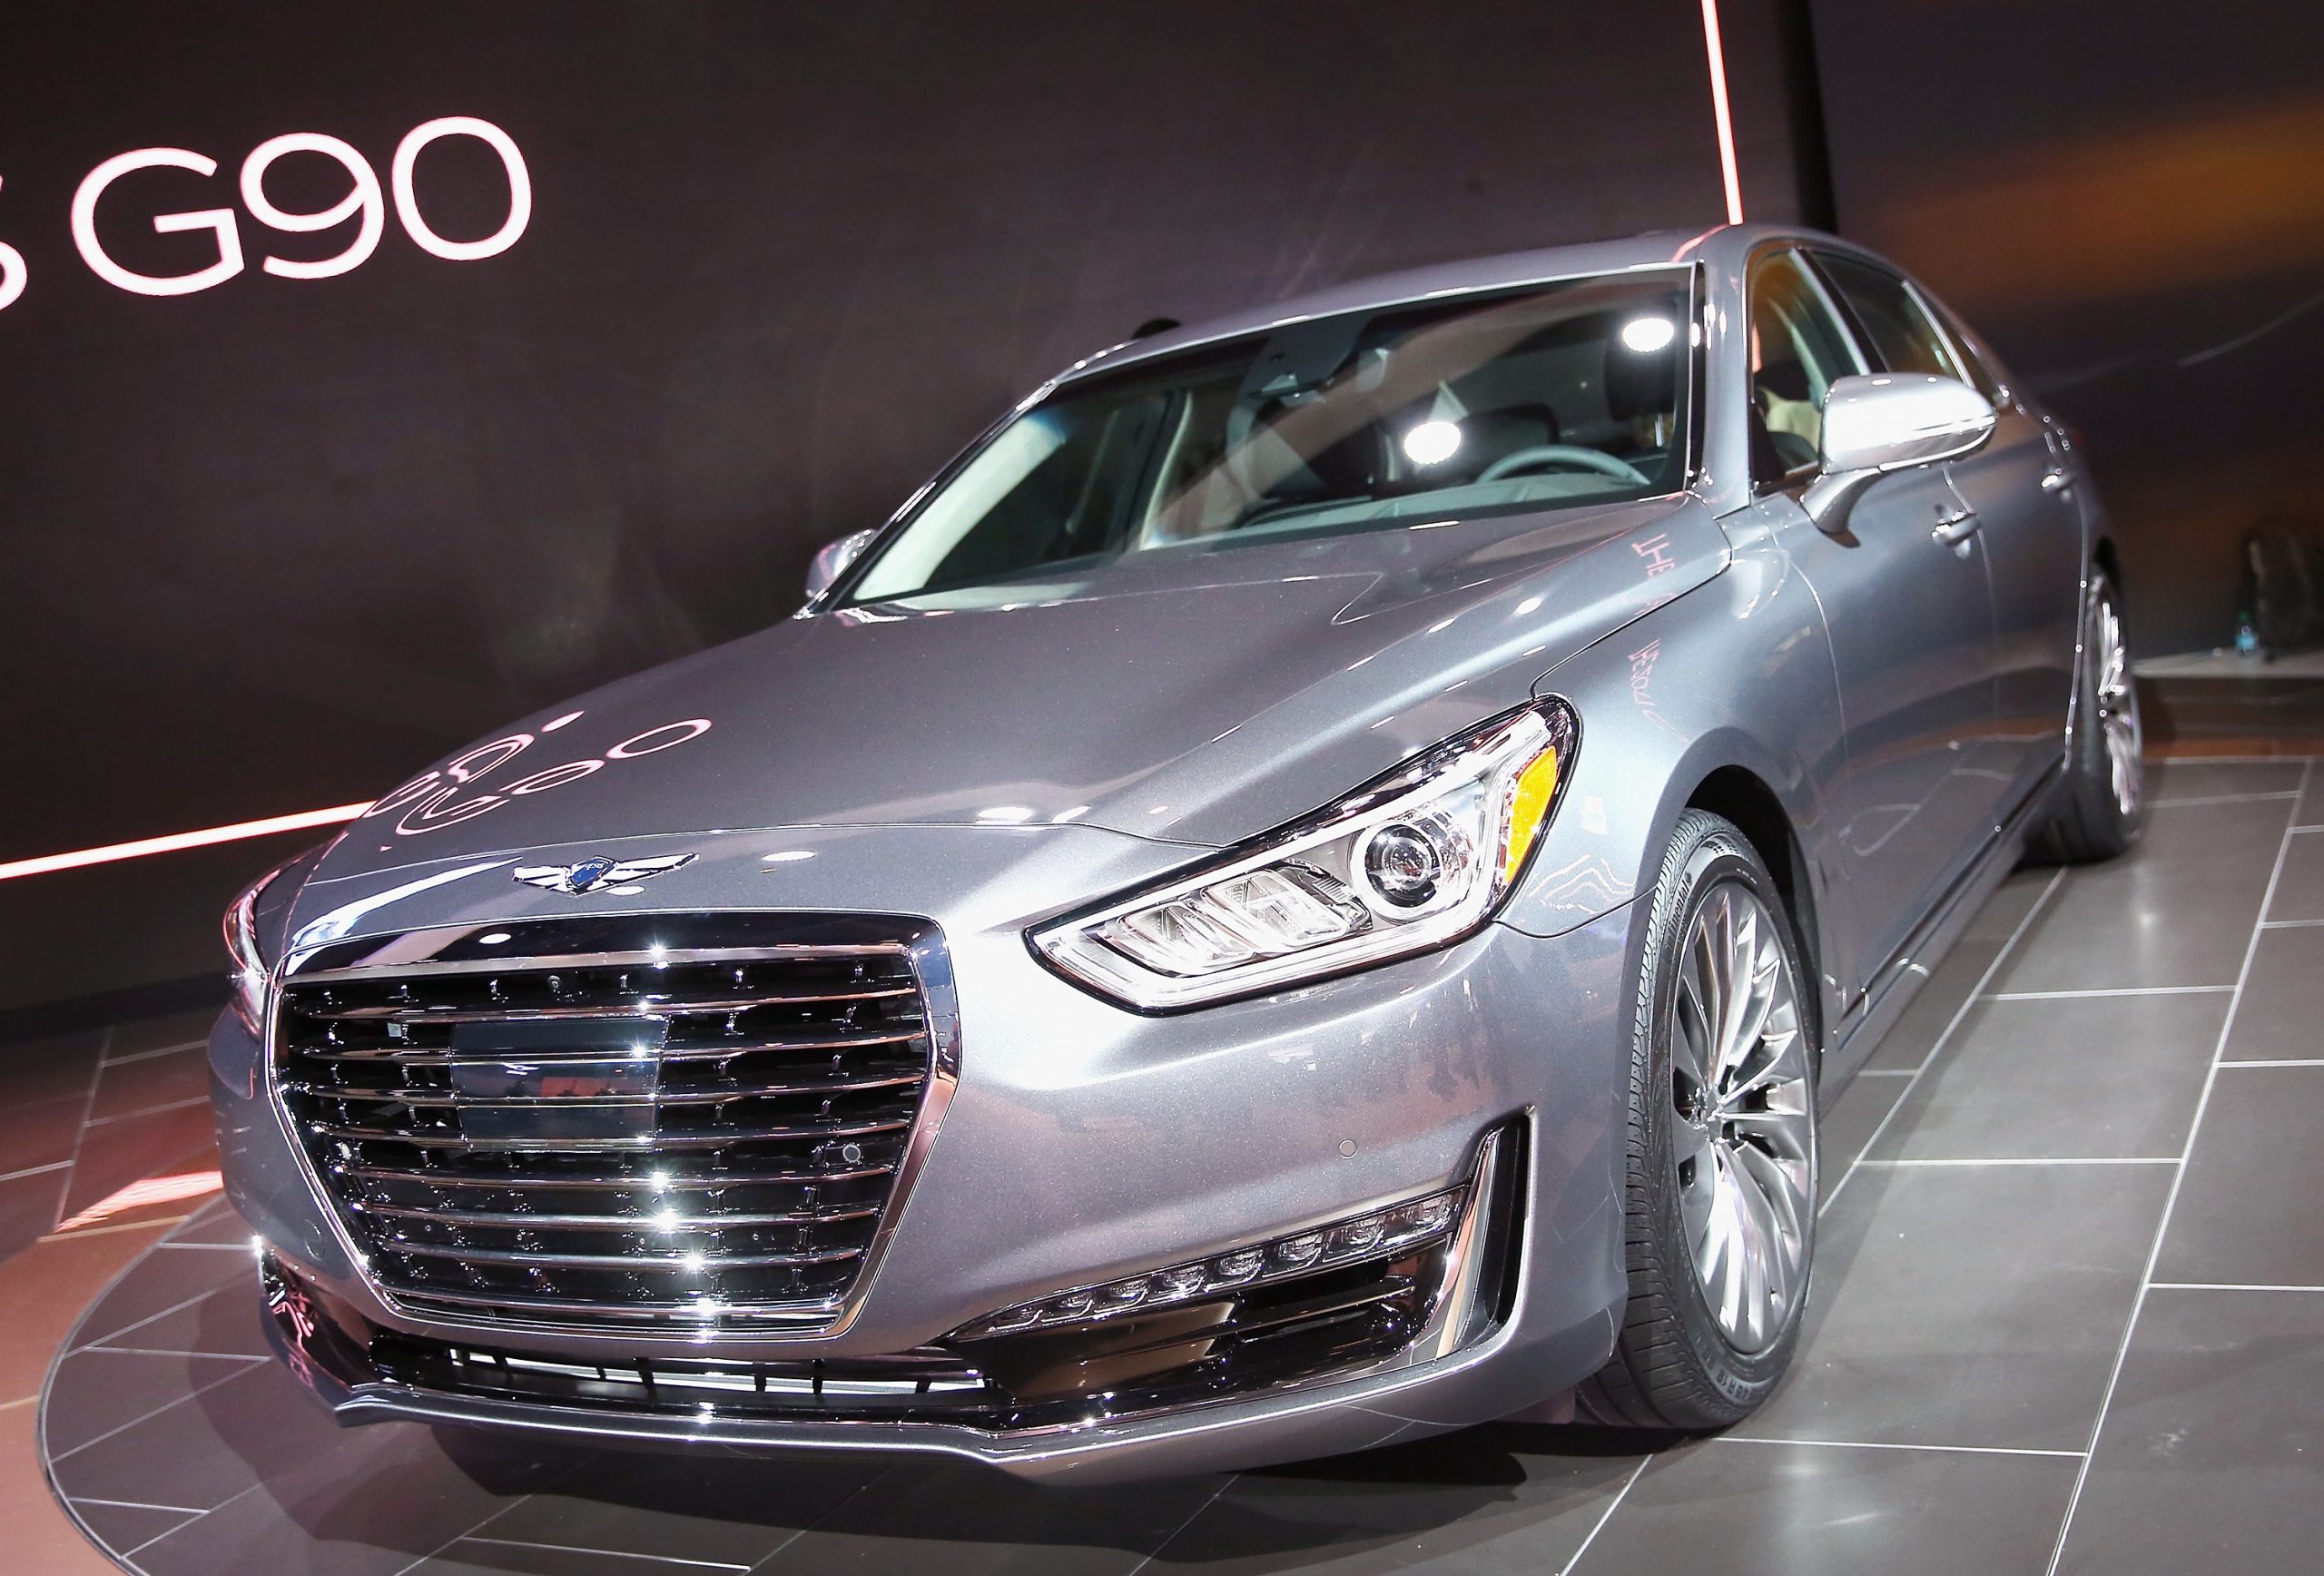 A Genesis G90 on display at an auto show